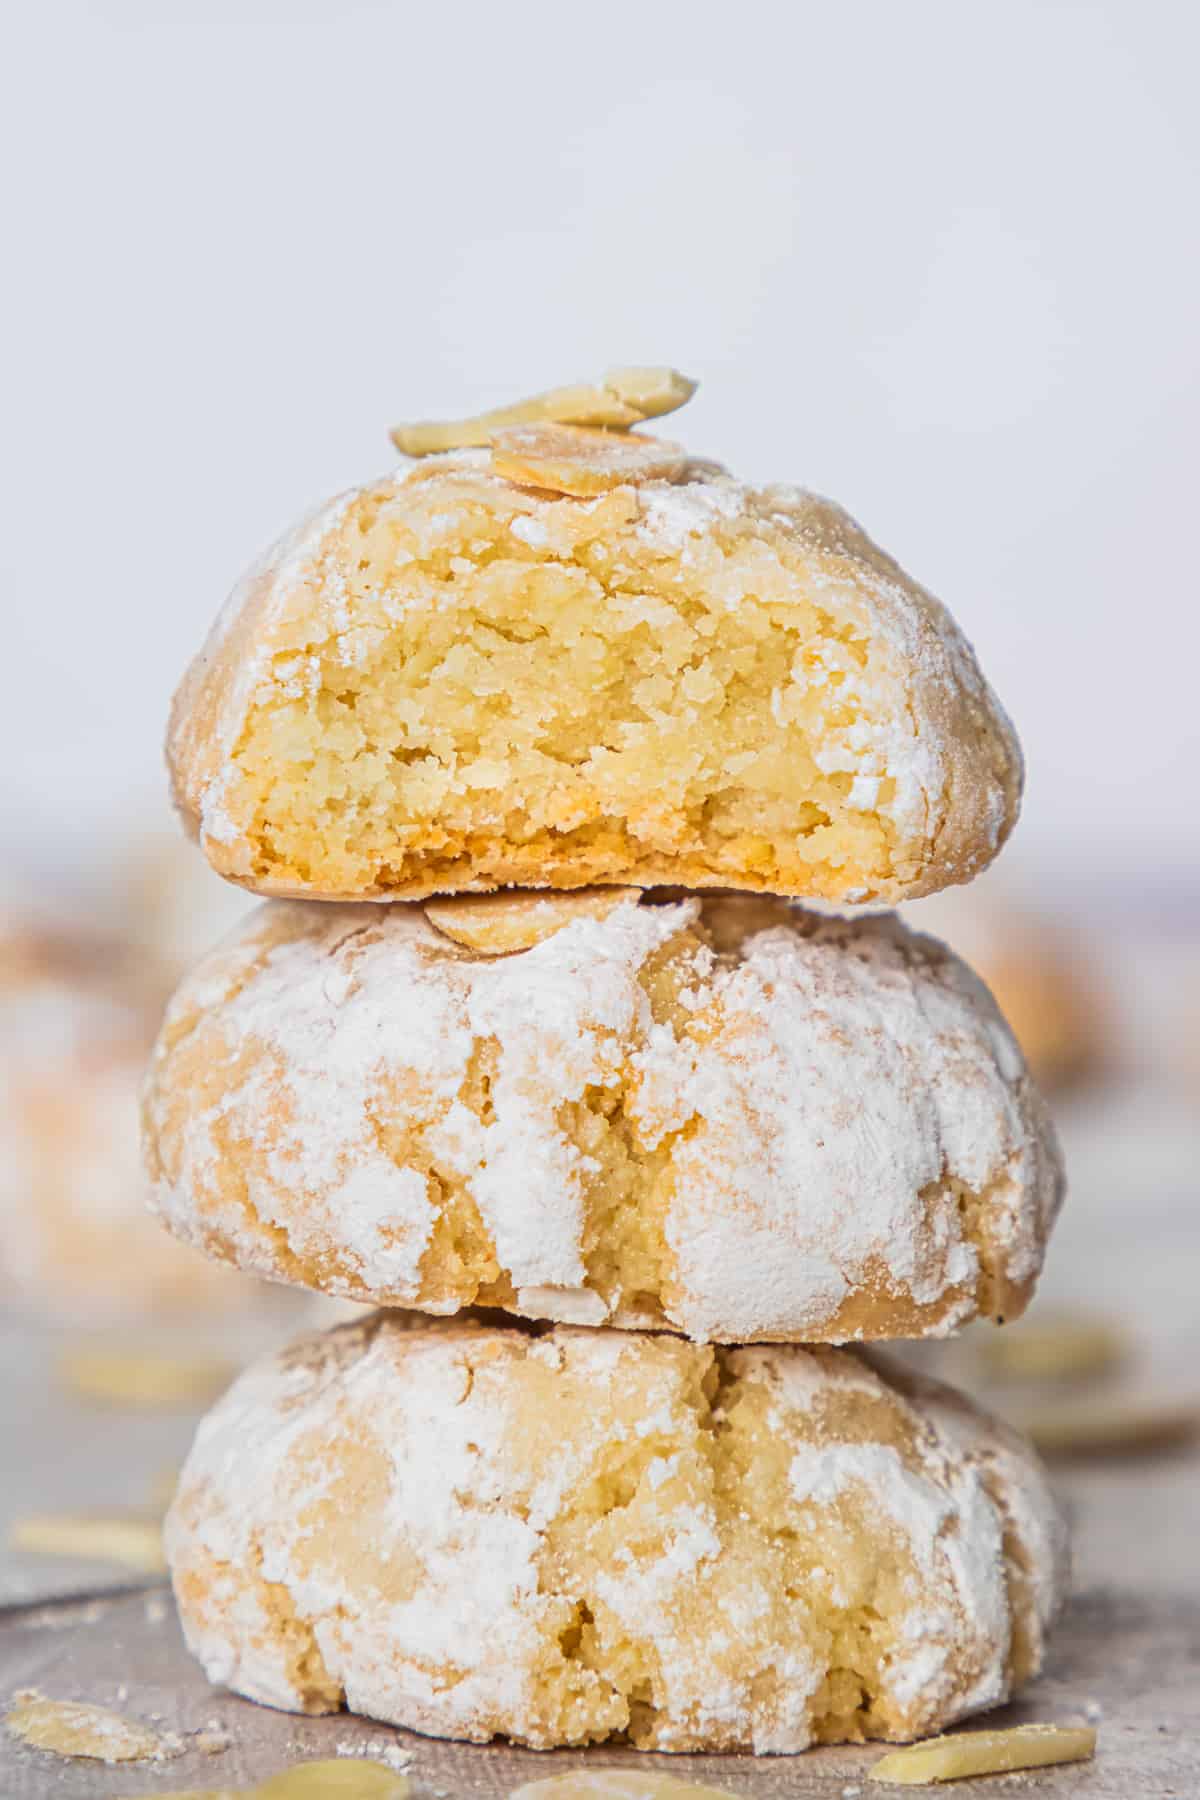 Three Italian Amaretti cookies on top of one another, with a top cookie broken in half to show soft, crumbly texture